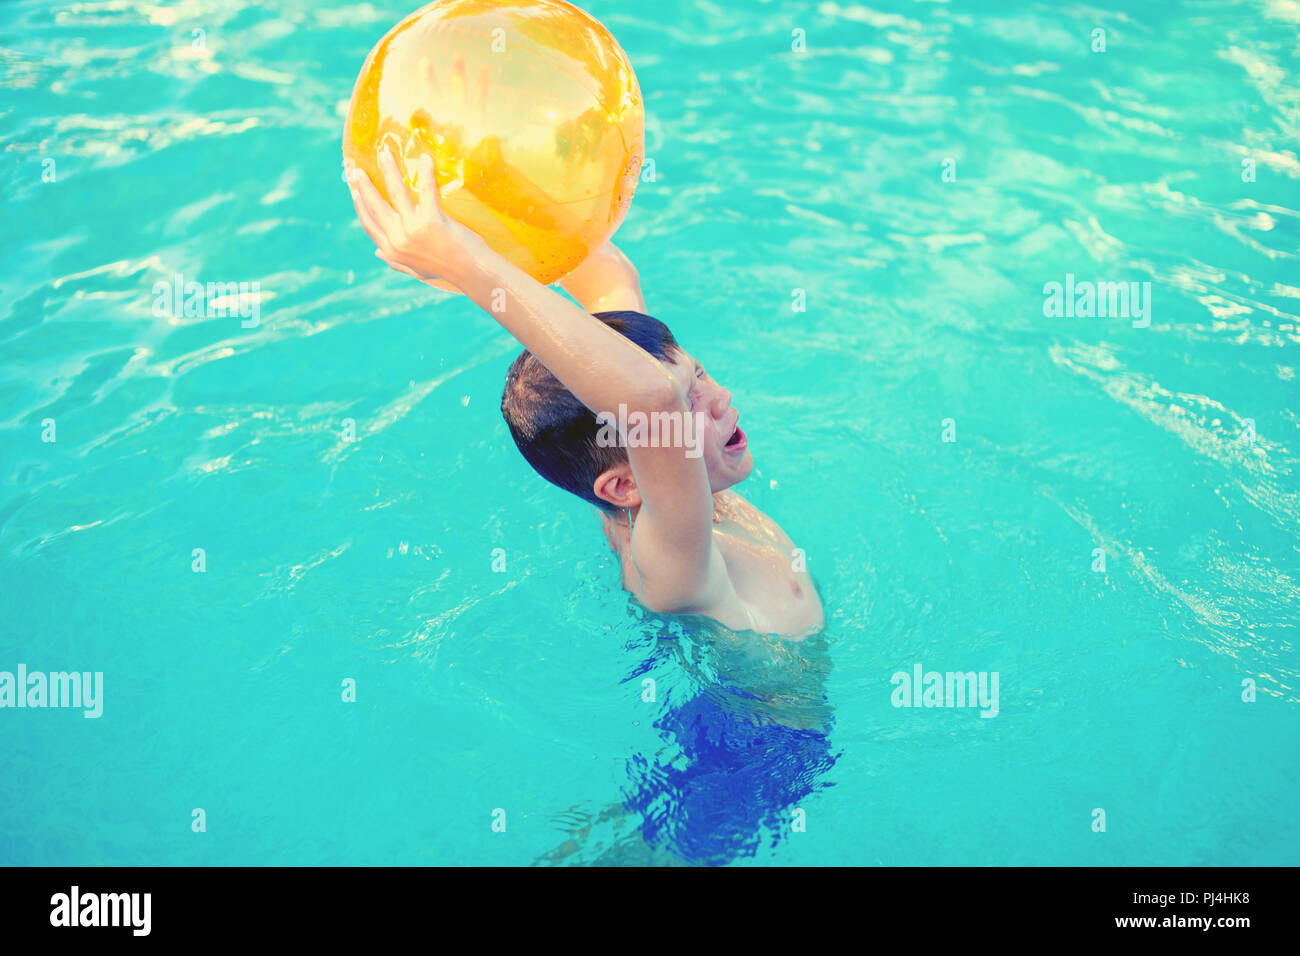 Little boy holding beach ball over head in swimming pool outdoor, summer activity Stock Photo